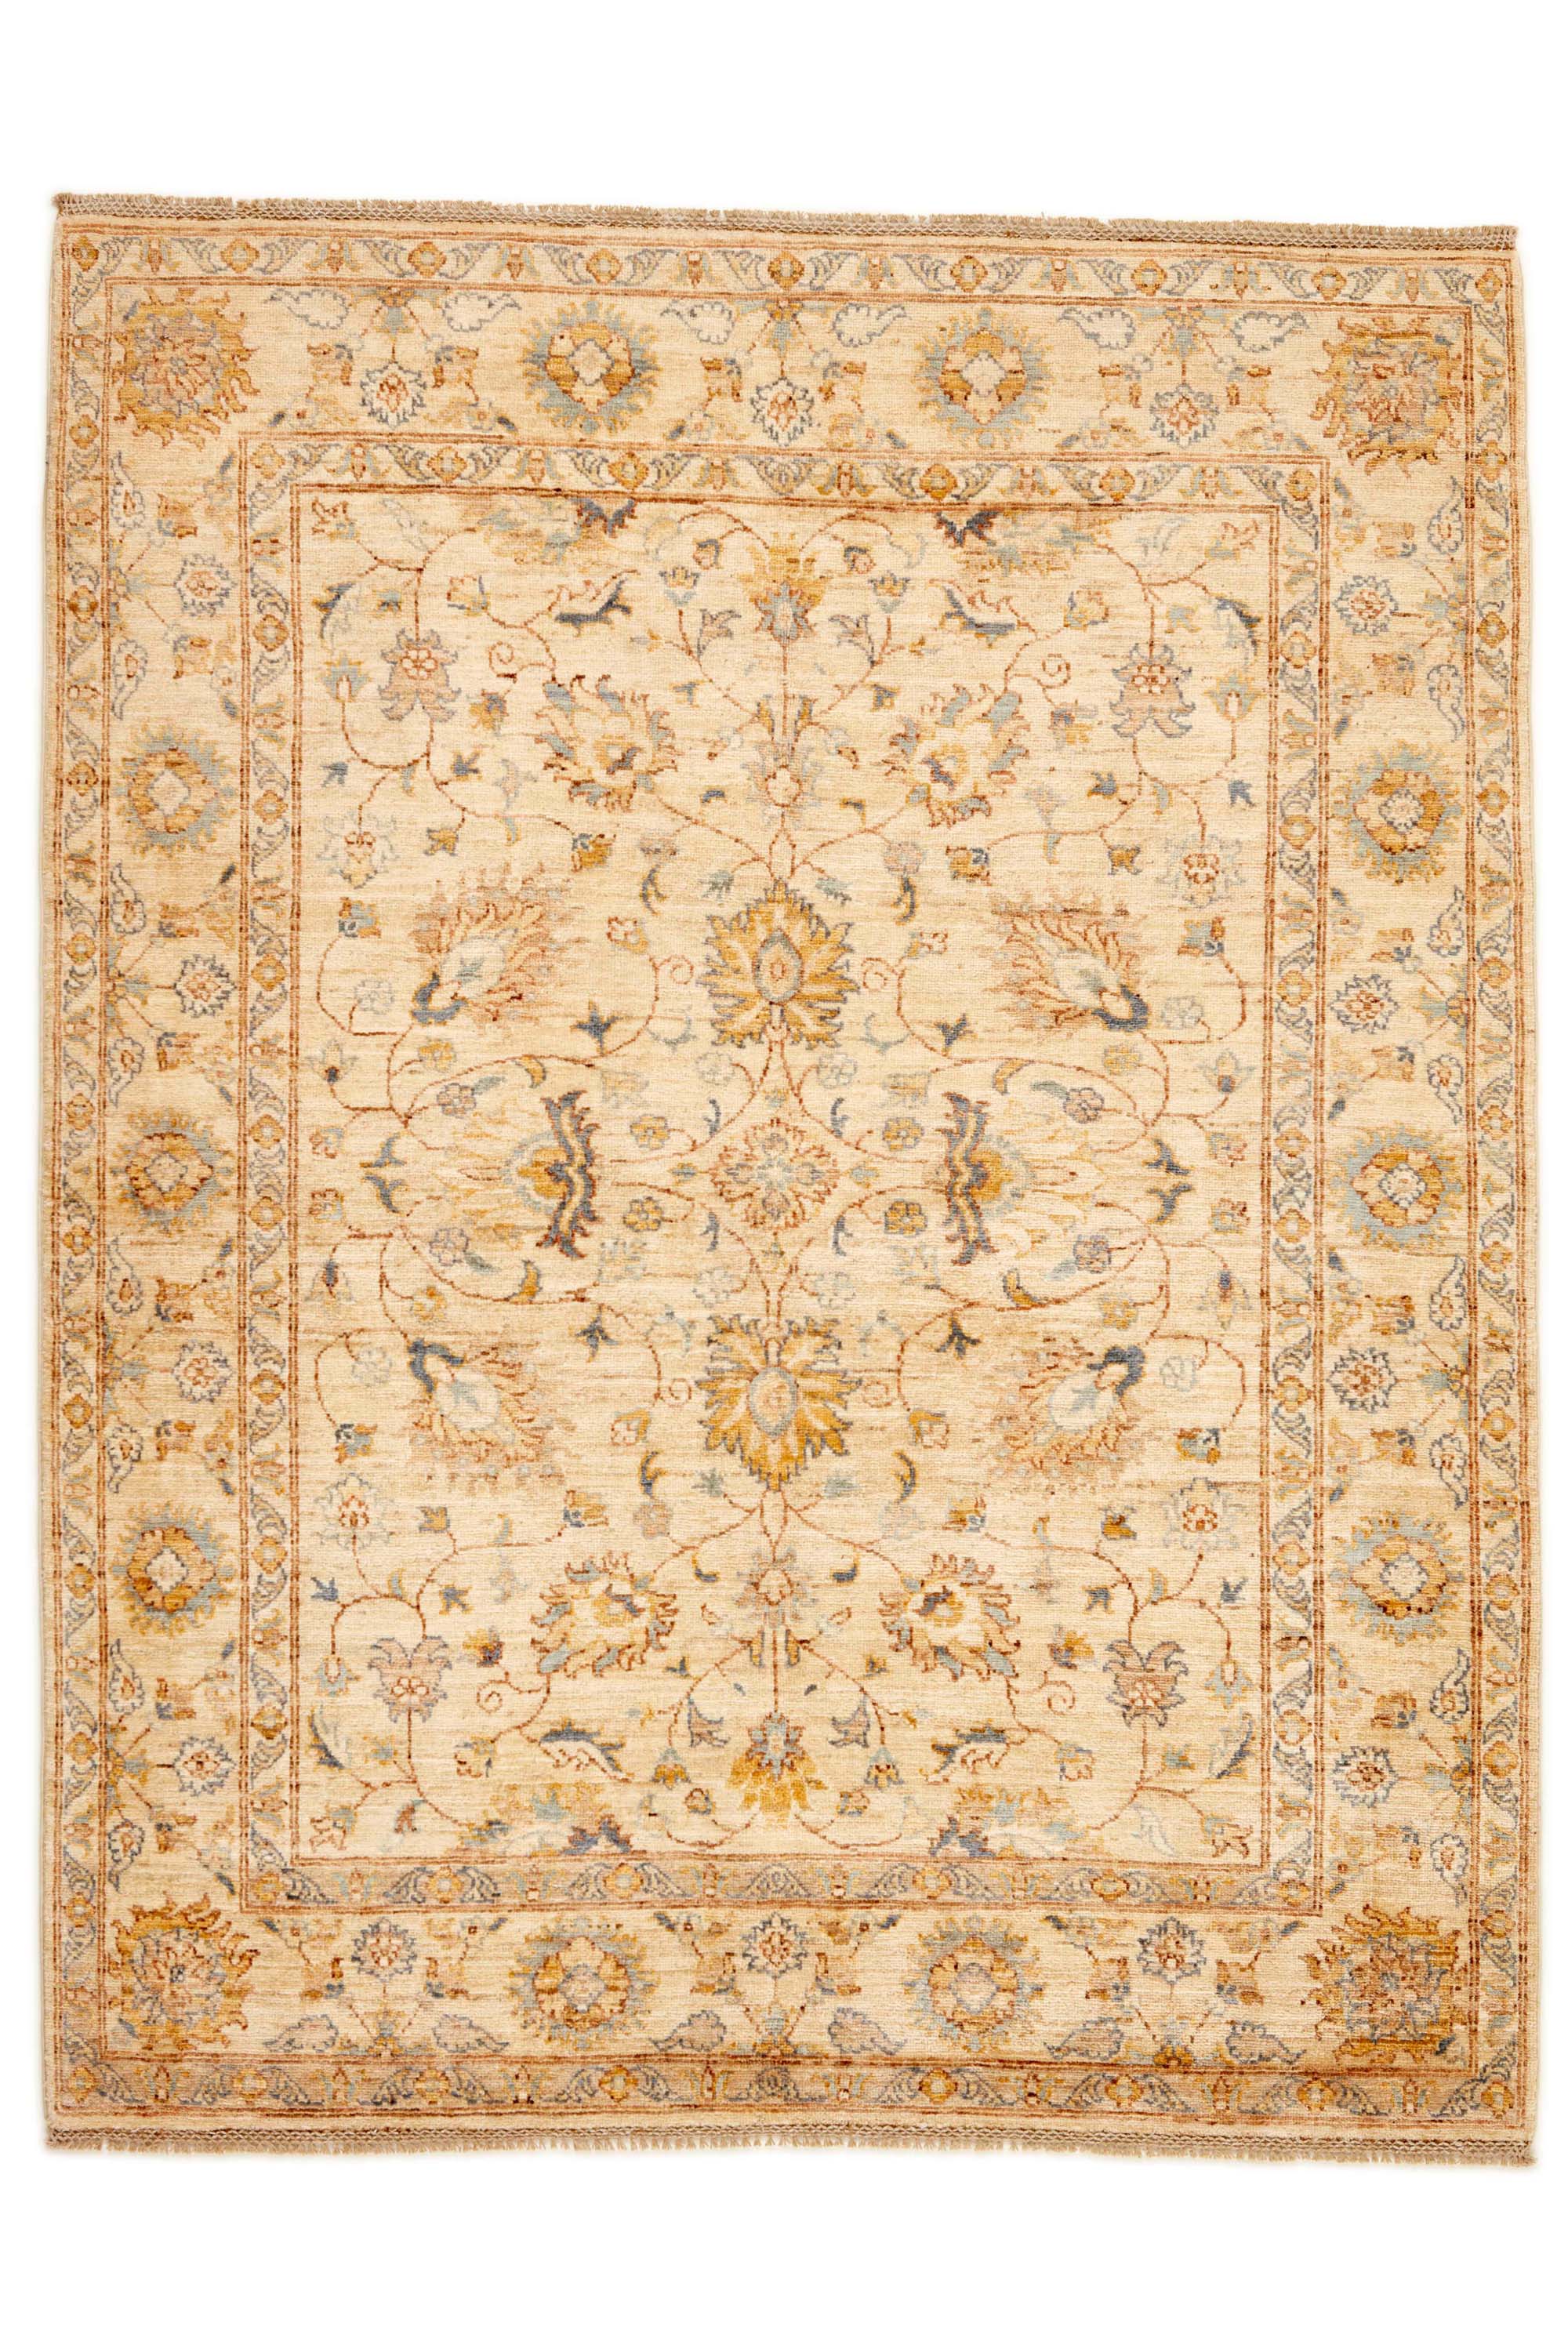 Traditional gold bordered Ziegler rug